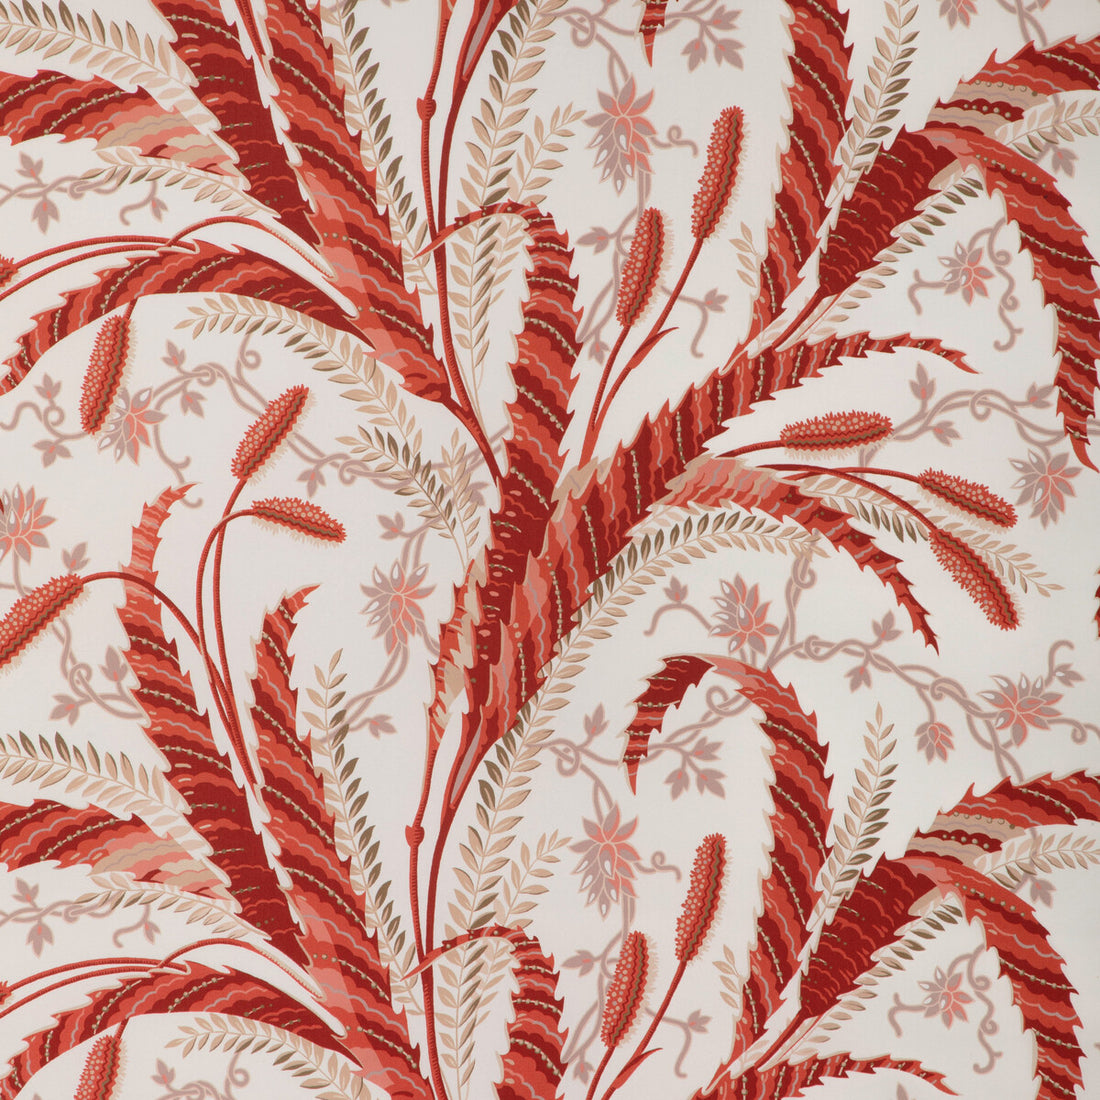 Vernay Print fabric in red color - pattern 8023101.19.0 - by Brunschwig &amp; Fils in the Cadenet collection